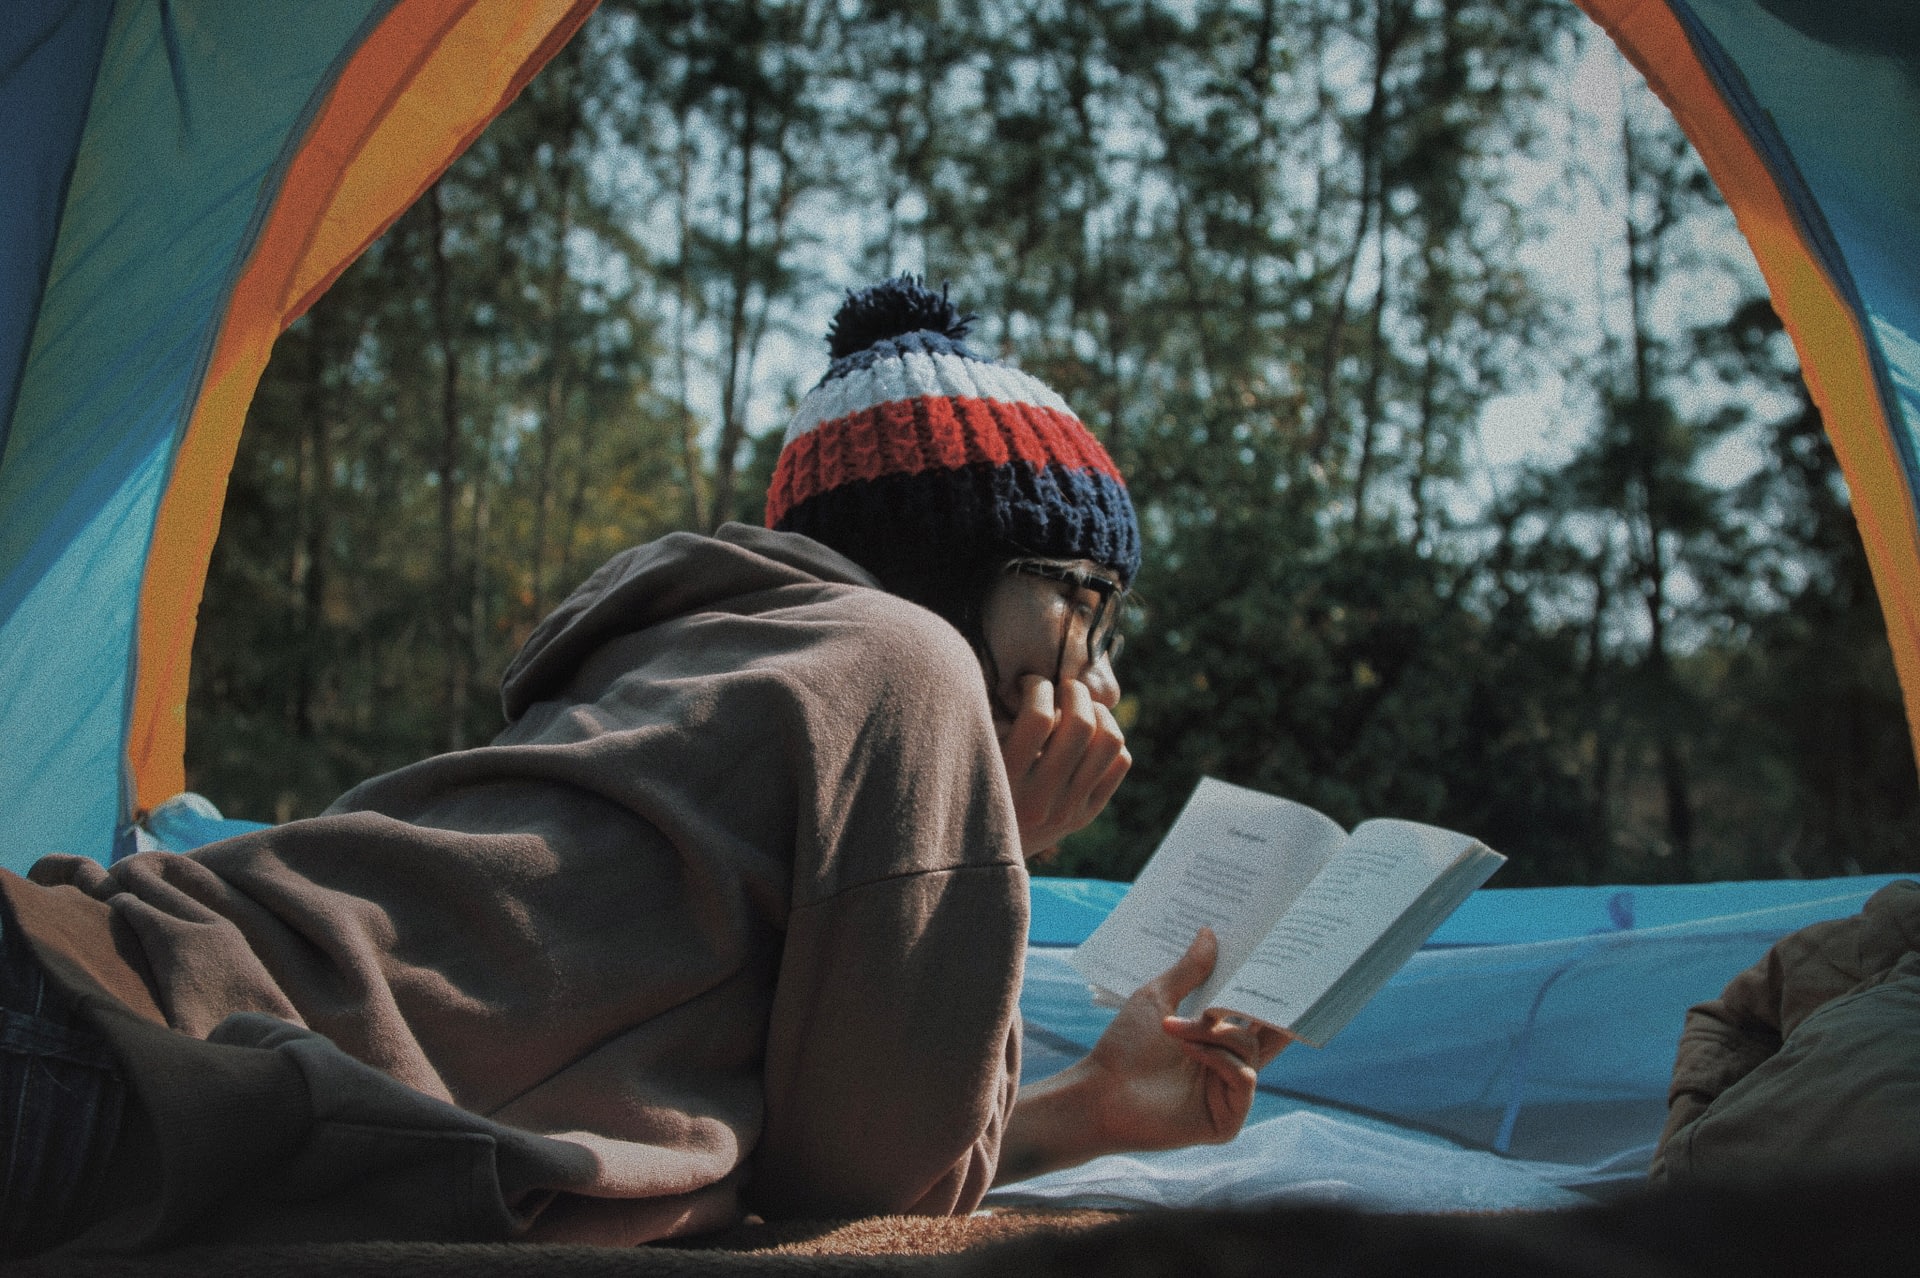 Girl reading a self-help book inside a tent while camping outdoors